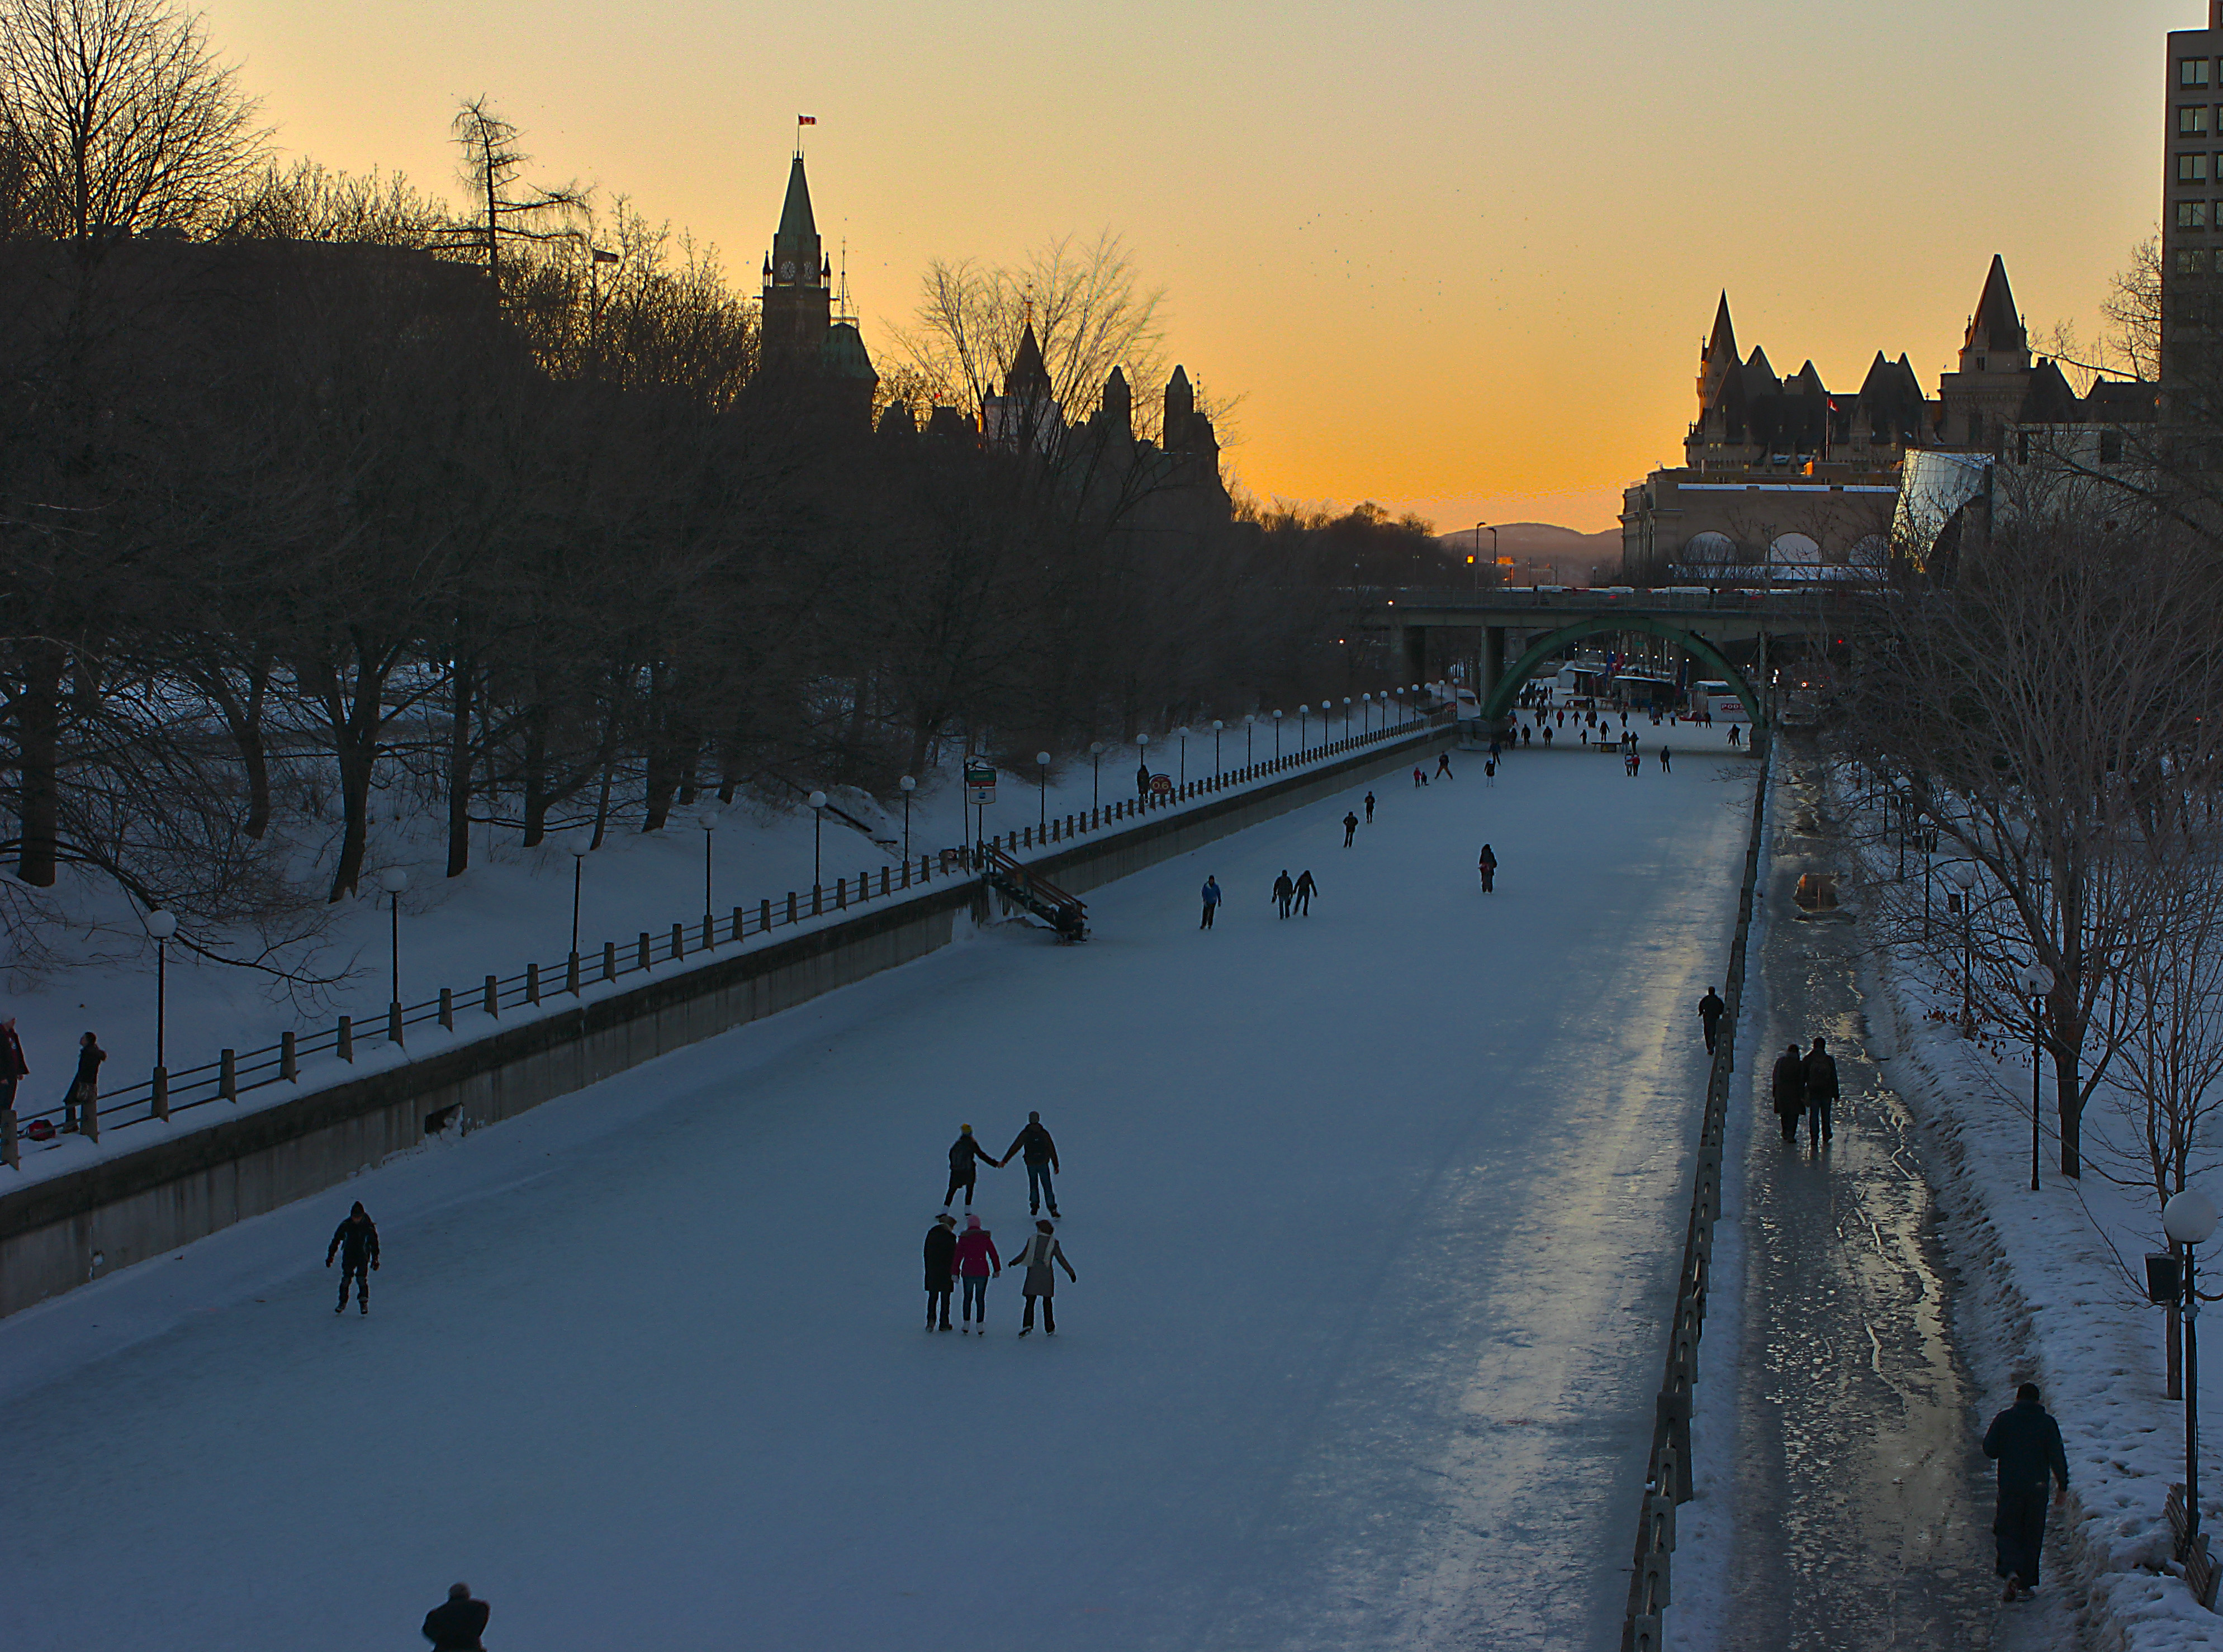 Canal in front of Parliament building in Ottawa